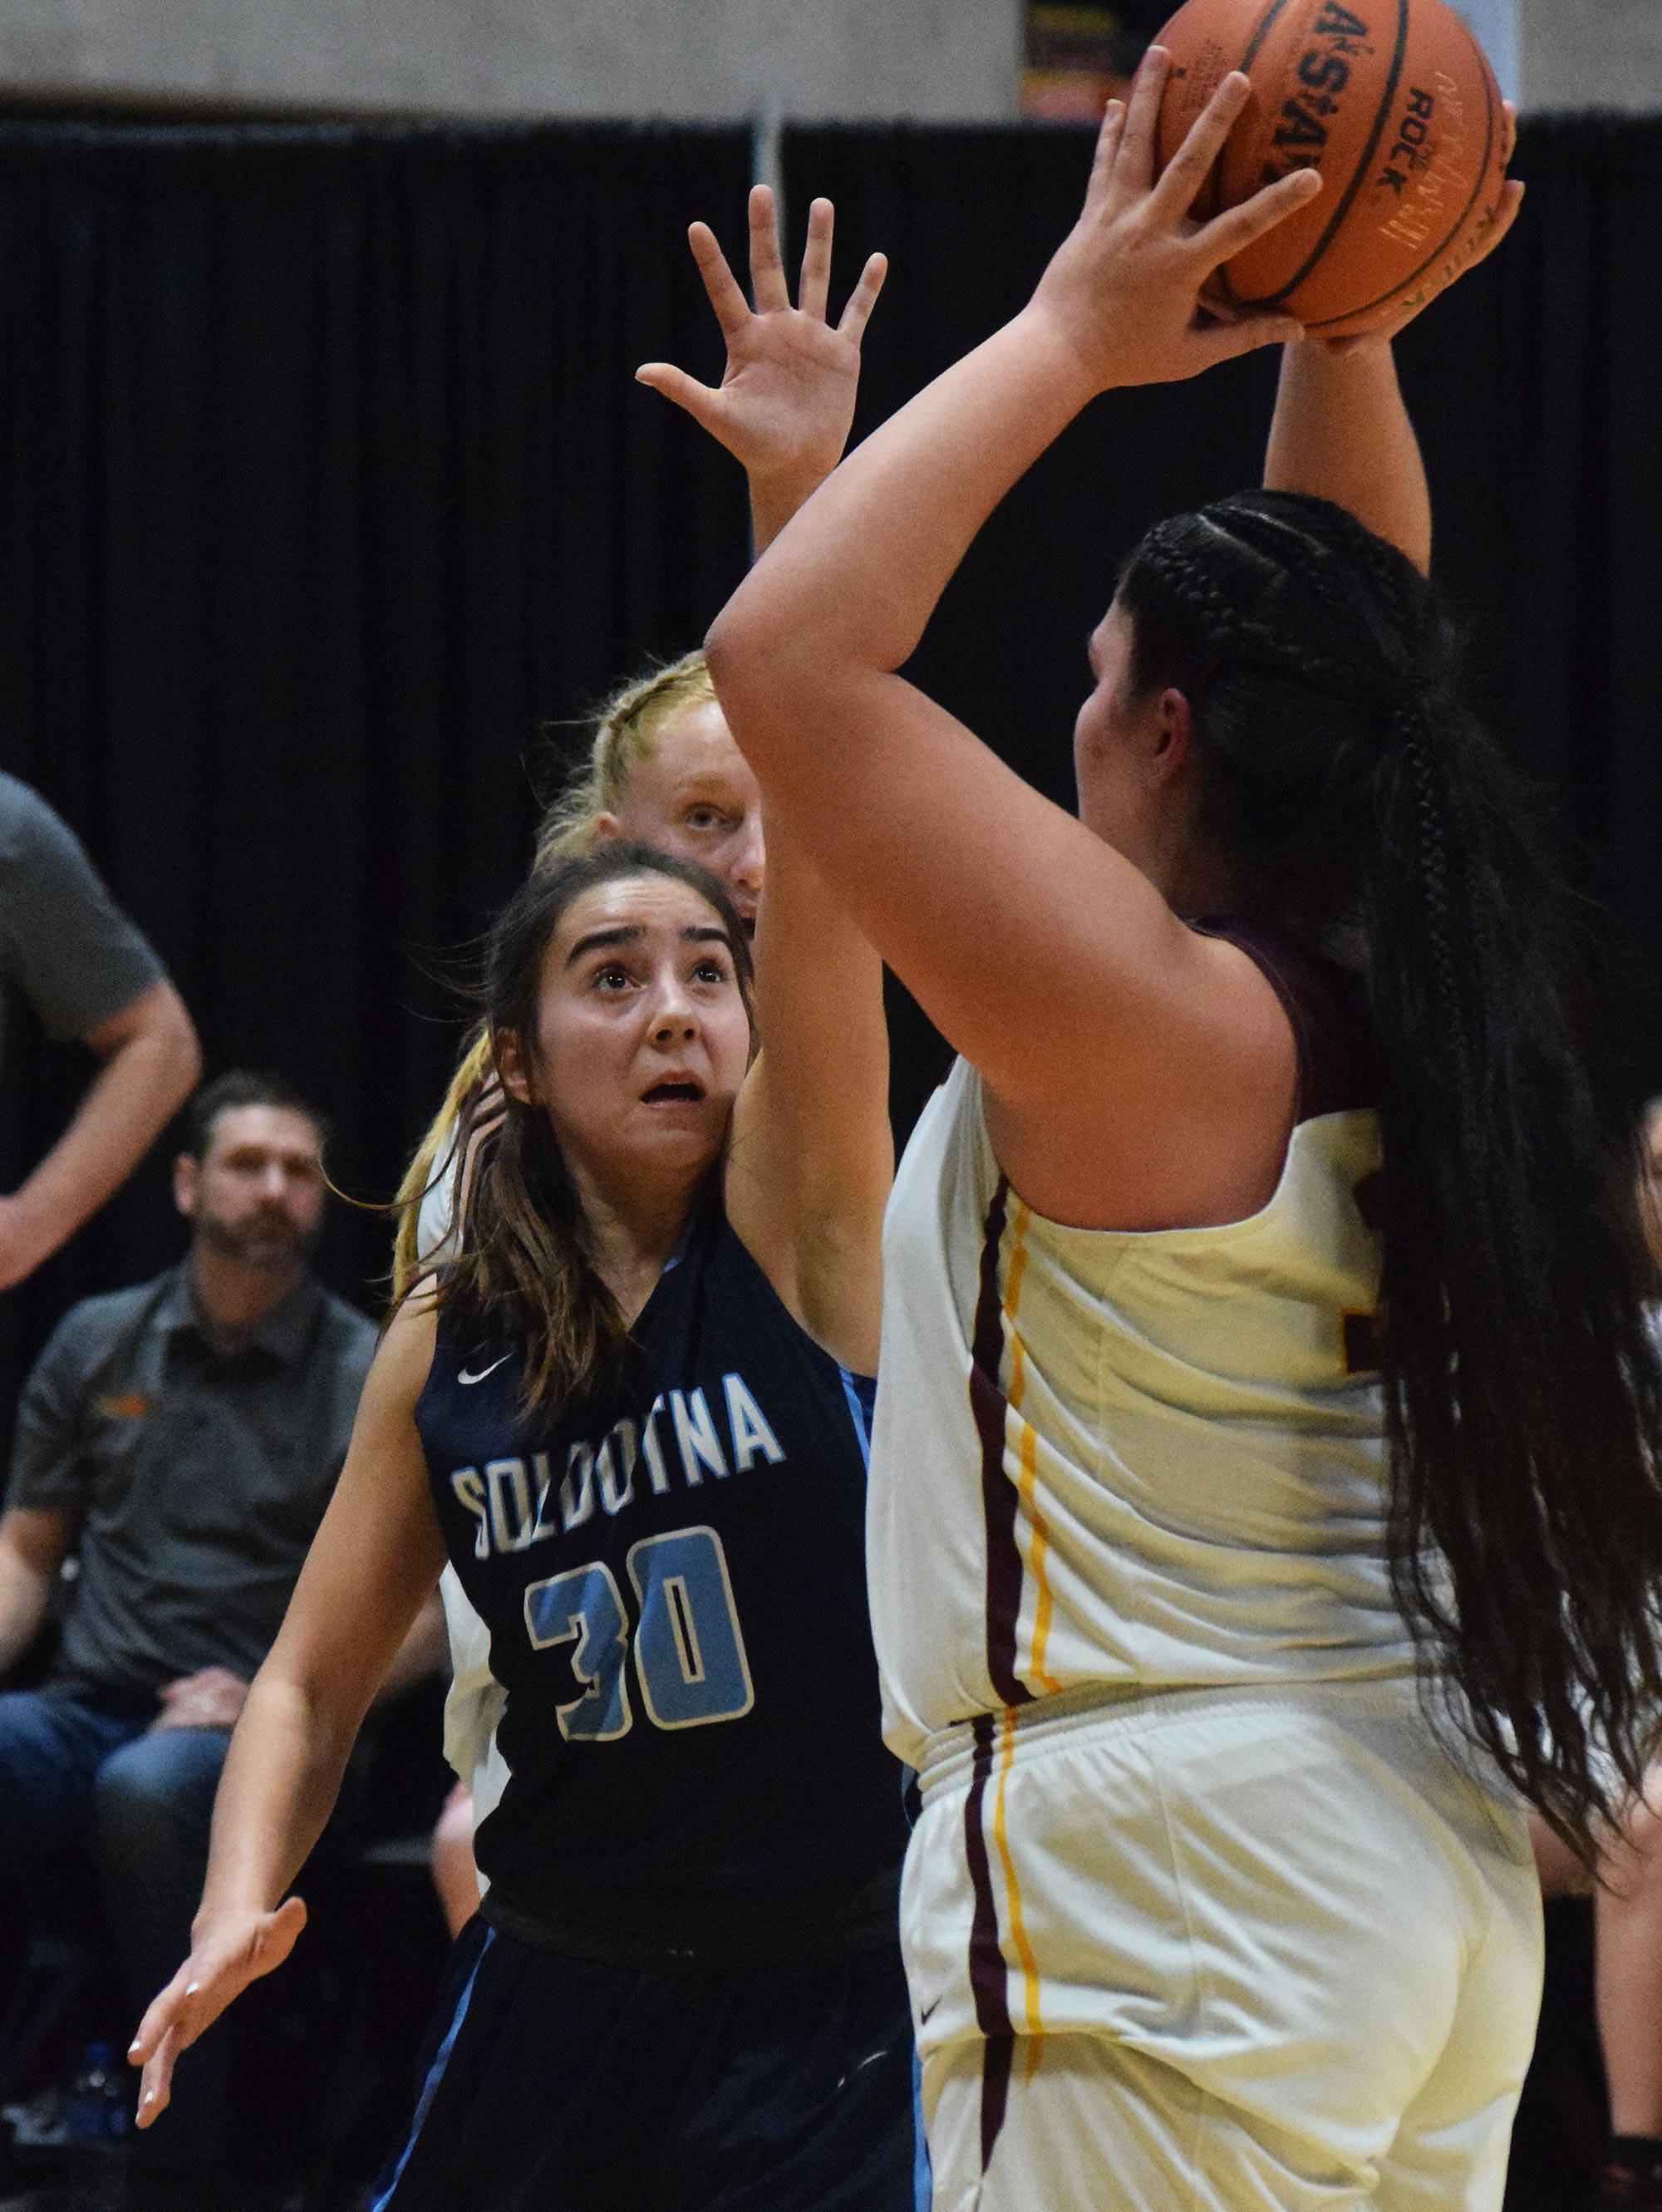 Soldotna’s Drysta Crosby-Schneider (30) puts up a block against Dimond’s Alissa Pili Friday, March 22, 2019, in the Class 4A state basketball tournament at the Alaska Airlines Center in Anchorage. (Photo by Joey Klecka/Peninsula Clarion)